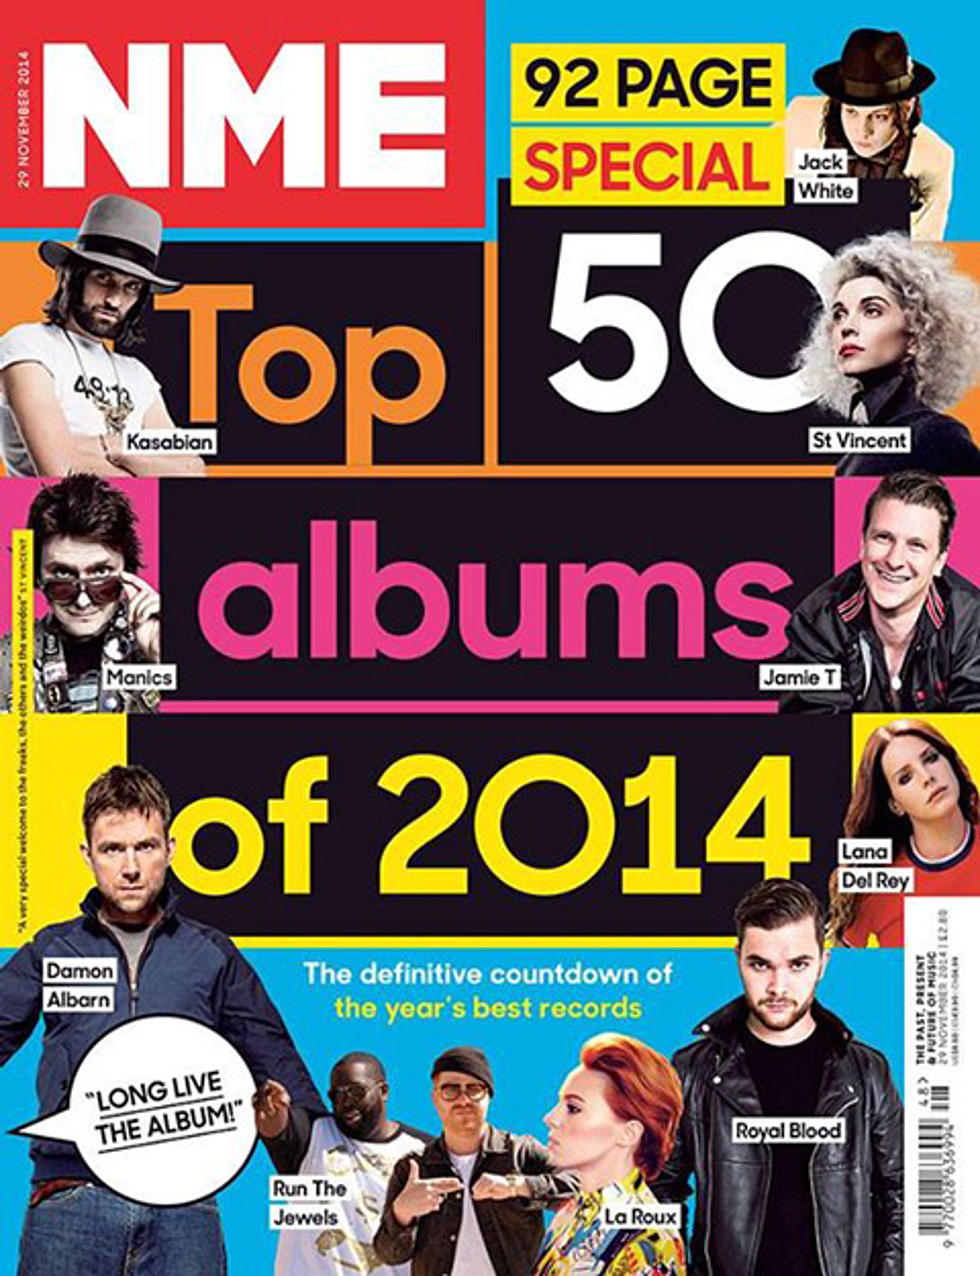 NME&#8217;s Top 50 albums &#038; tracks of 2014